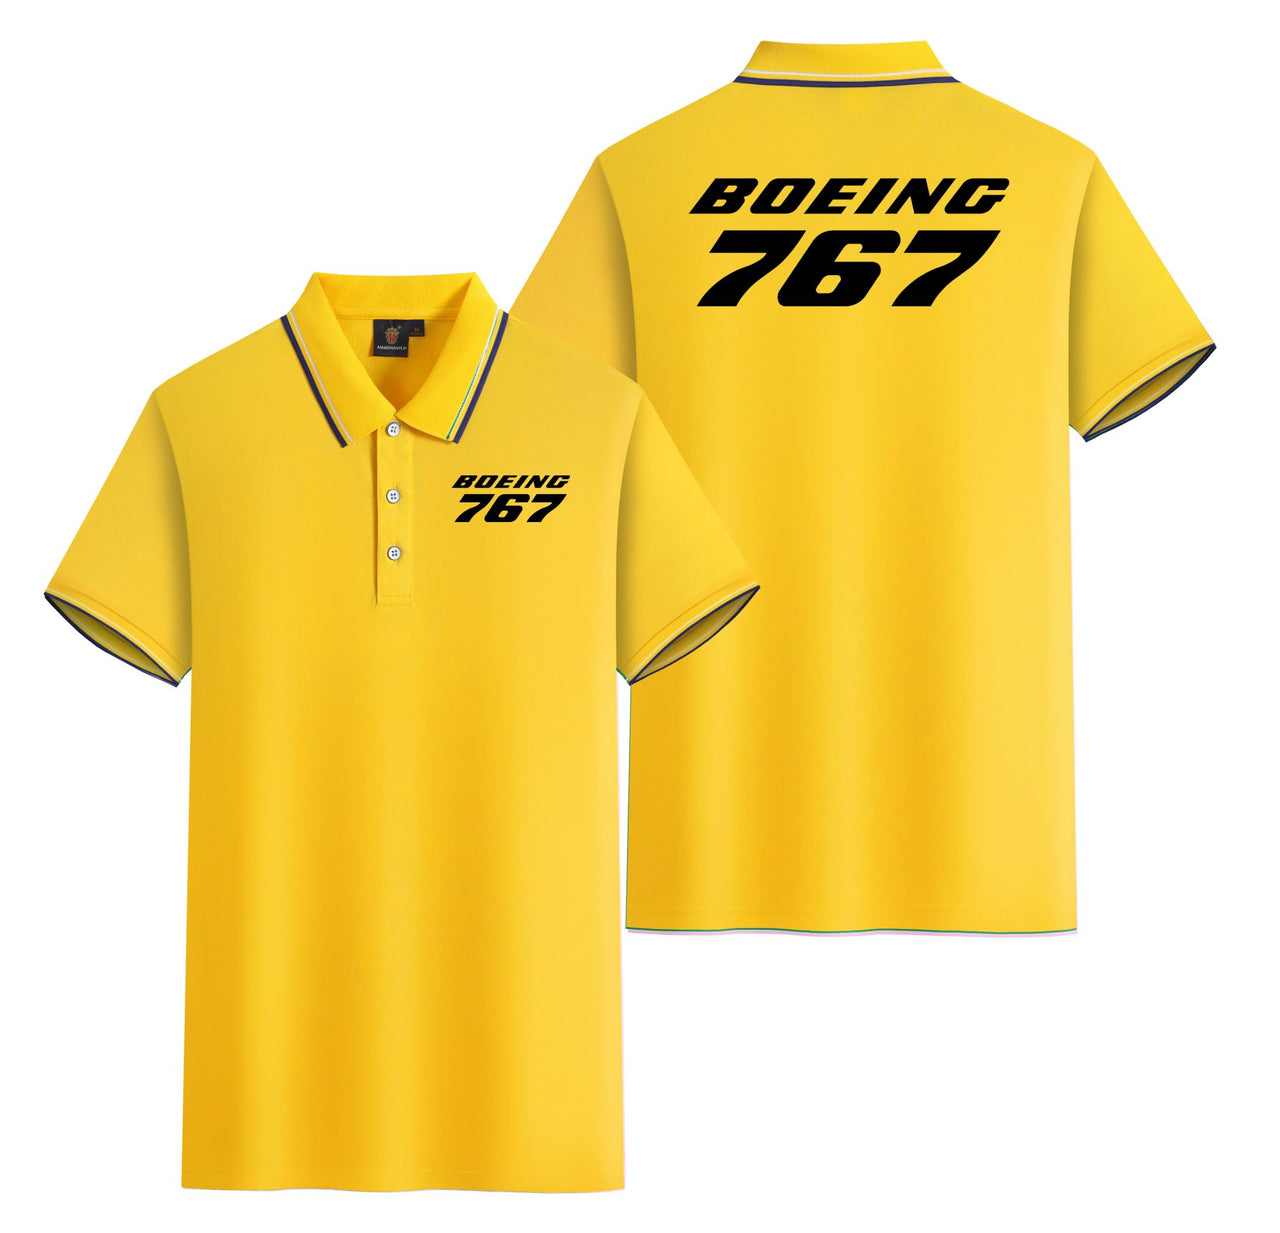 Boeing 767 & Text Designed Stylish Polo T-Shirts (Double-Side)